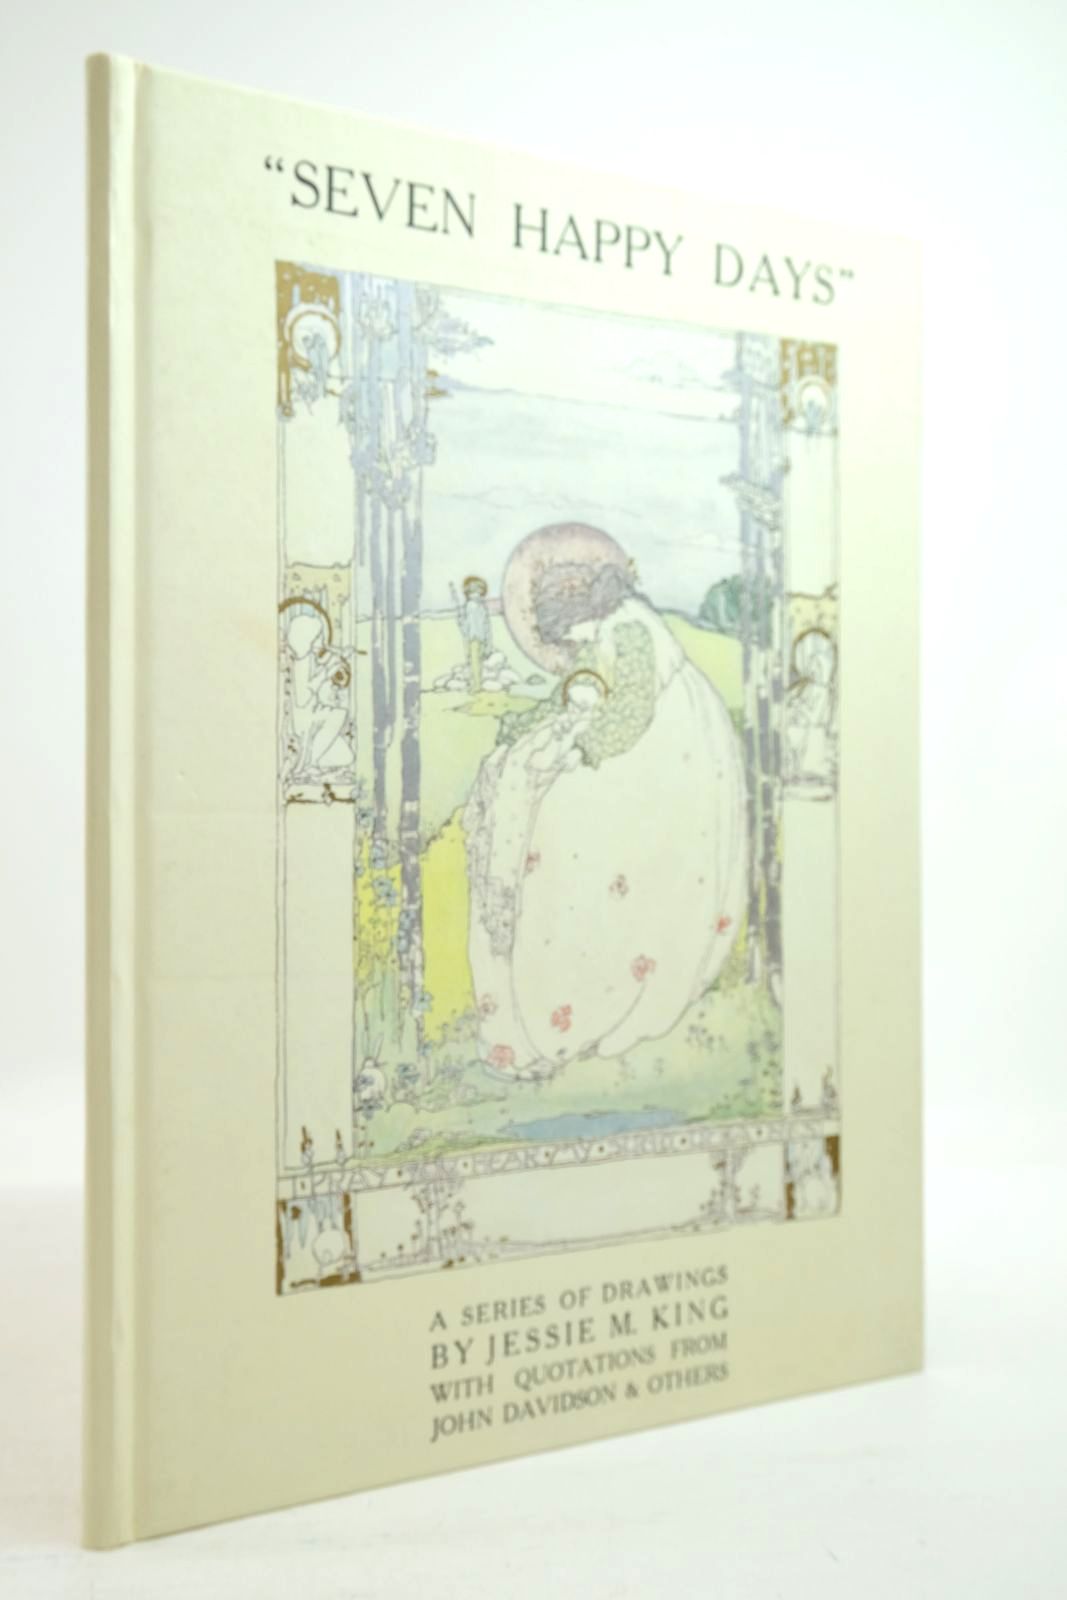 Photo of SEVEN HAPPY DAYS written by Davidson, John illustrated by King, Jessie M. published by The Fraser Press (STOCK CODE: 2134589)  for sale by Stella & Rose's Books